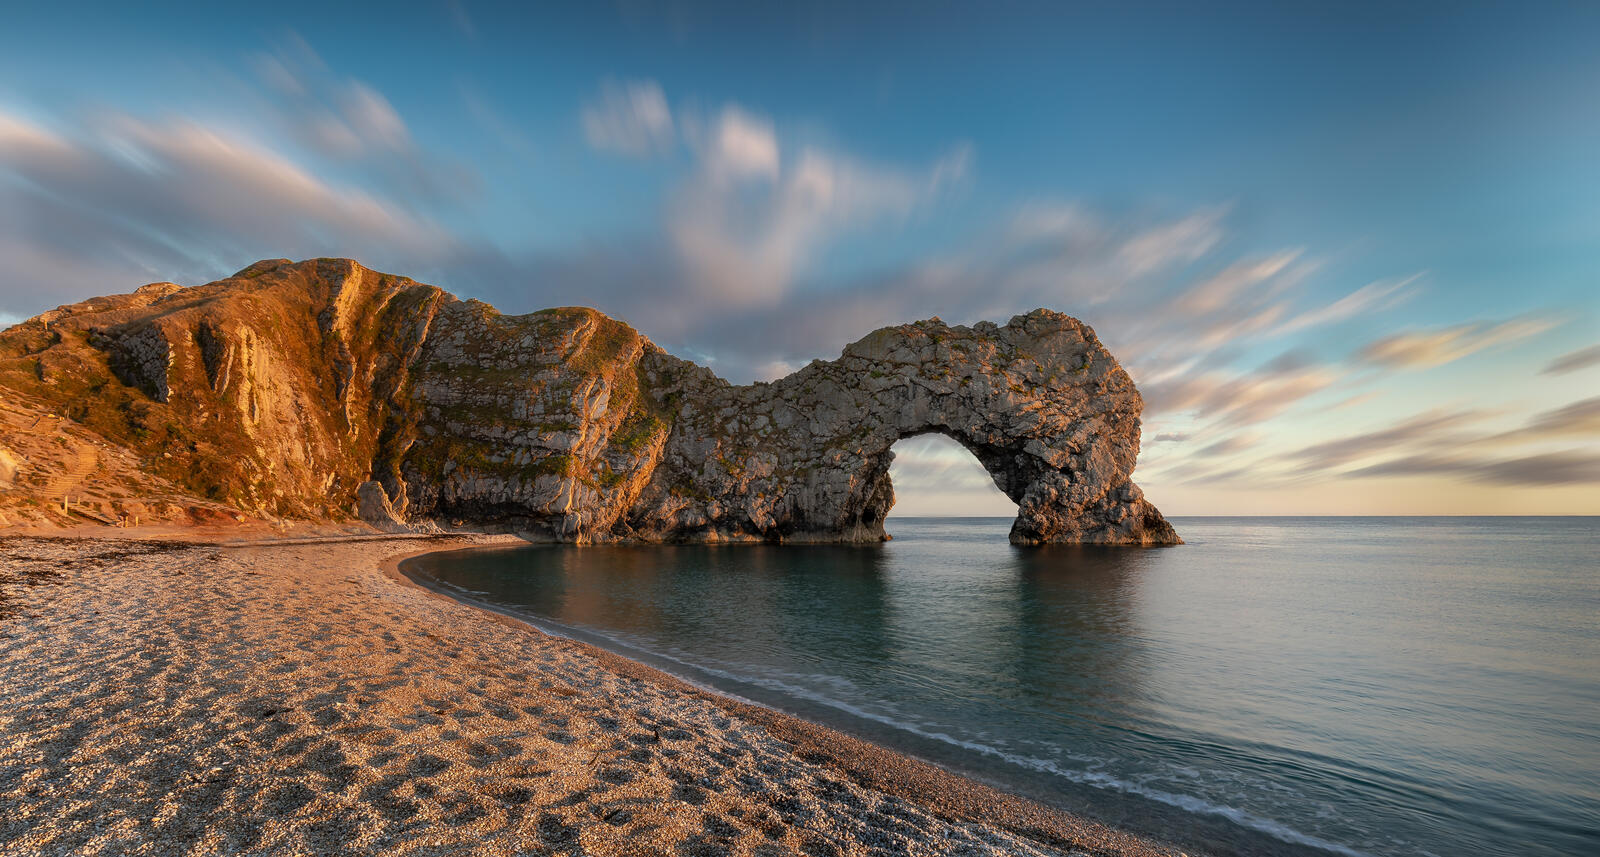 Wallpapers arch rocky shore coast england on the desktop